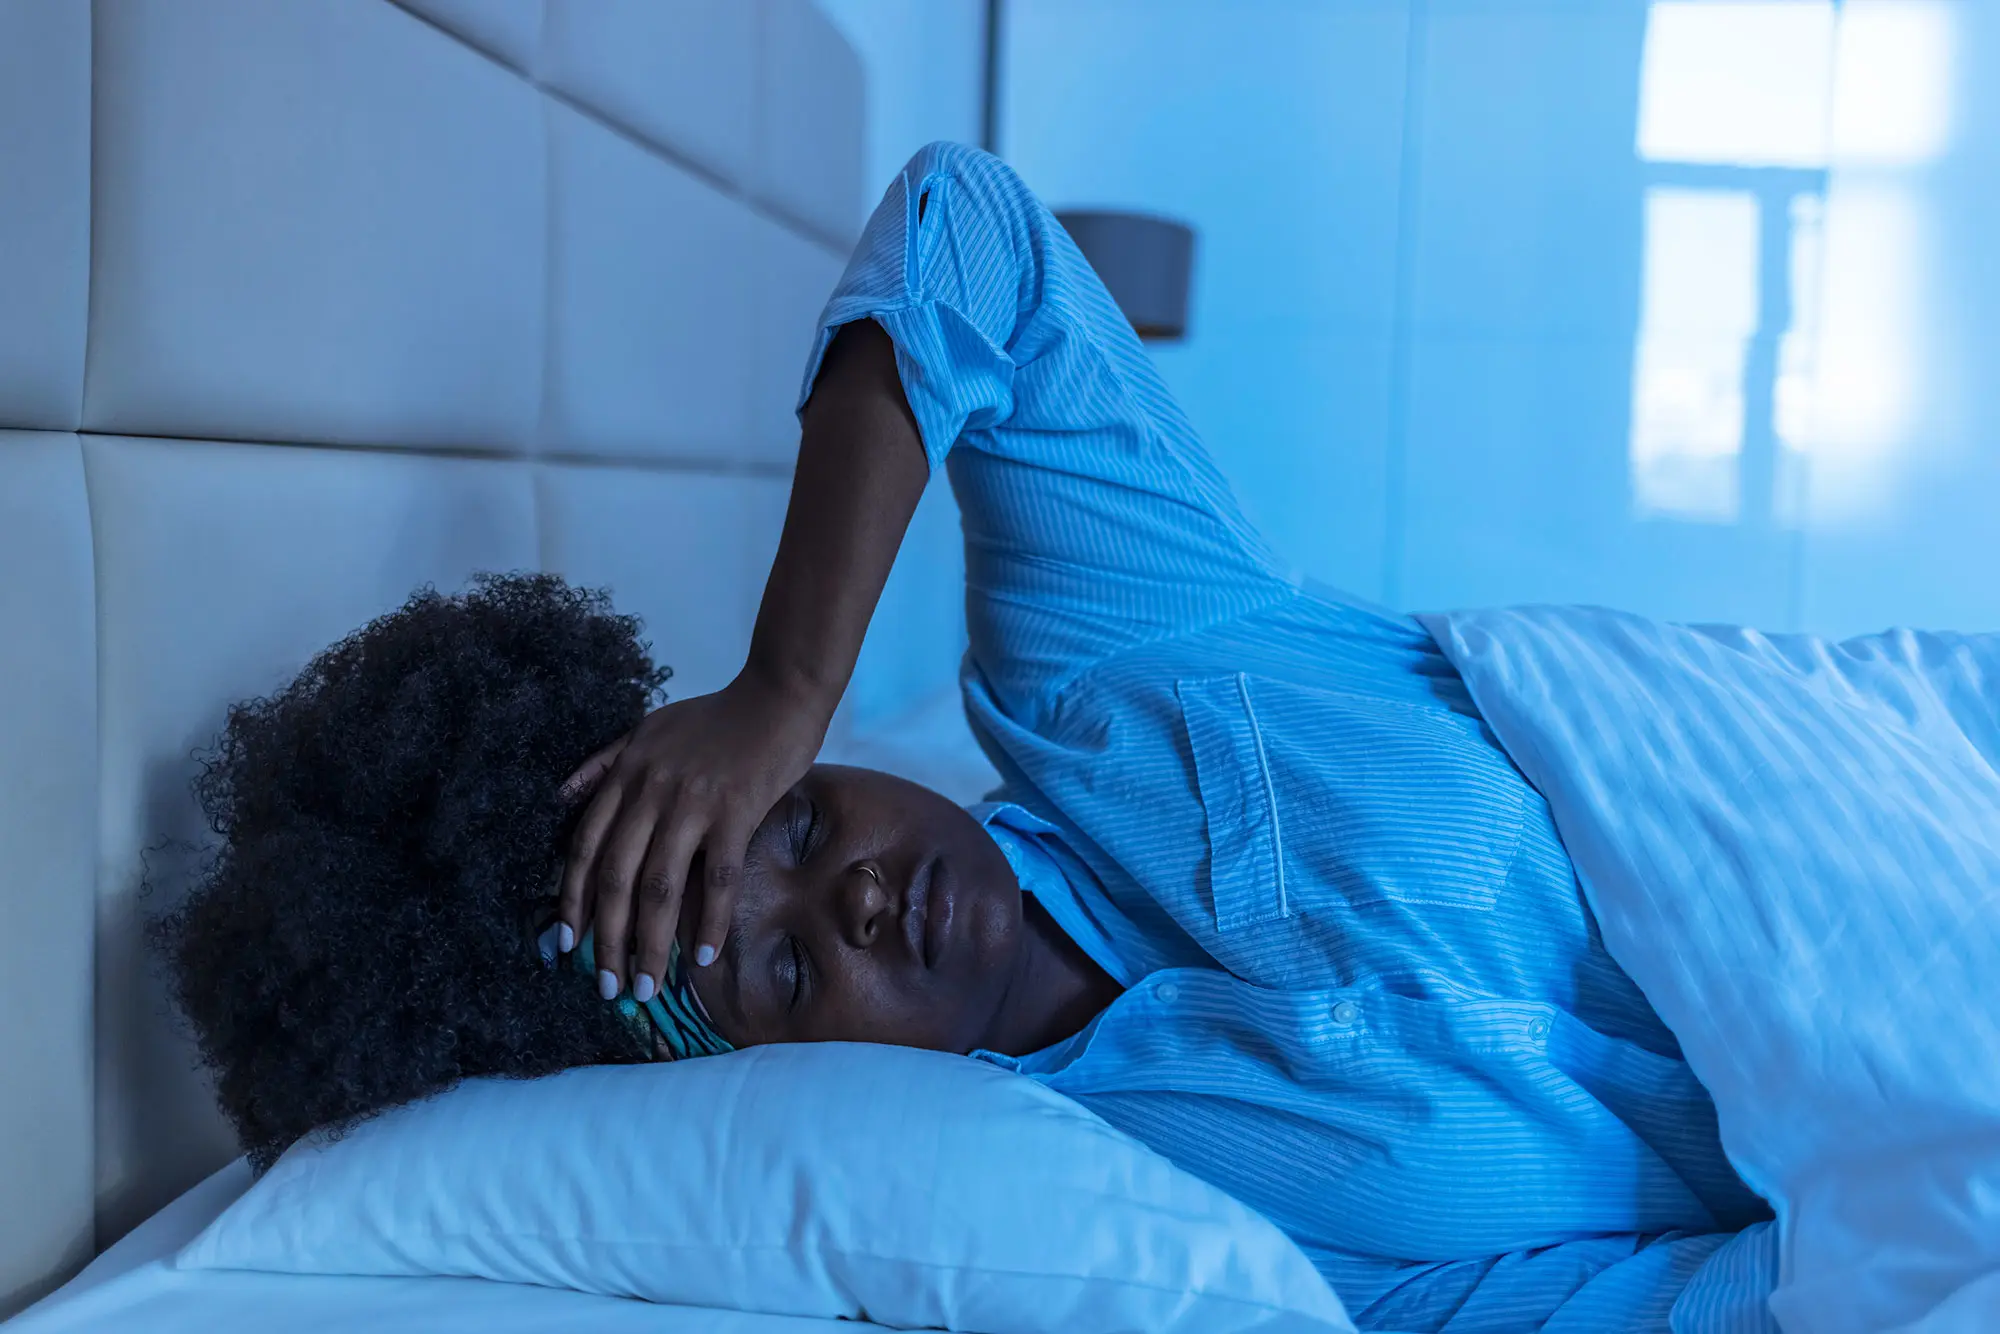 Black woman sleeping poorly, hand to her forehead in distress in the middle of the night. AW471